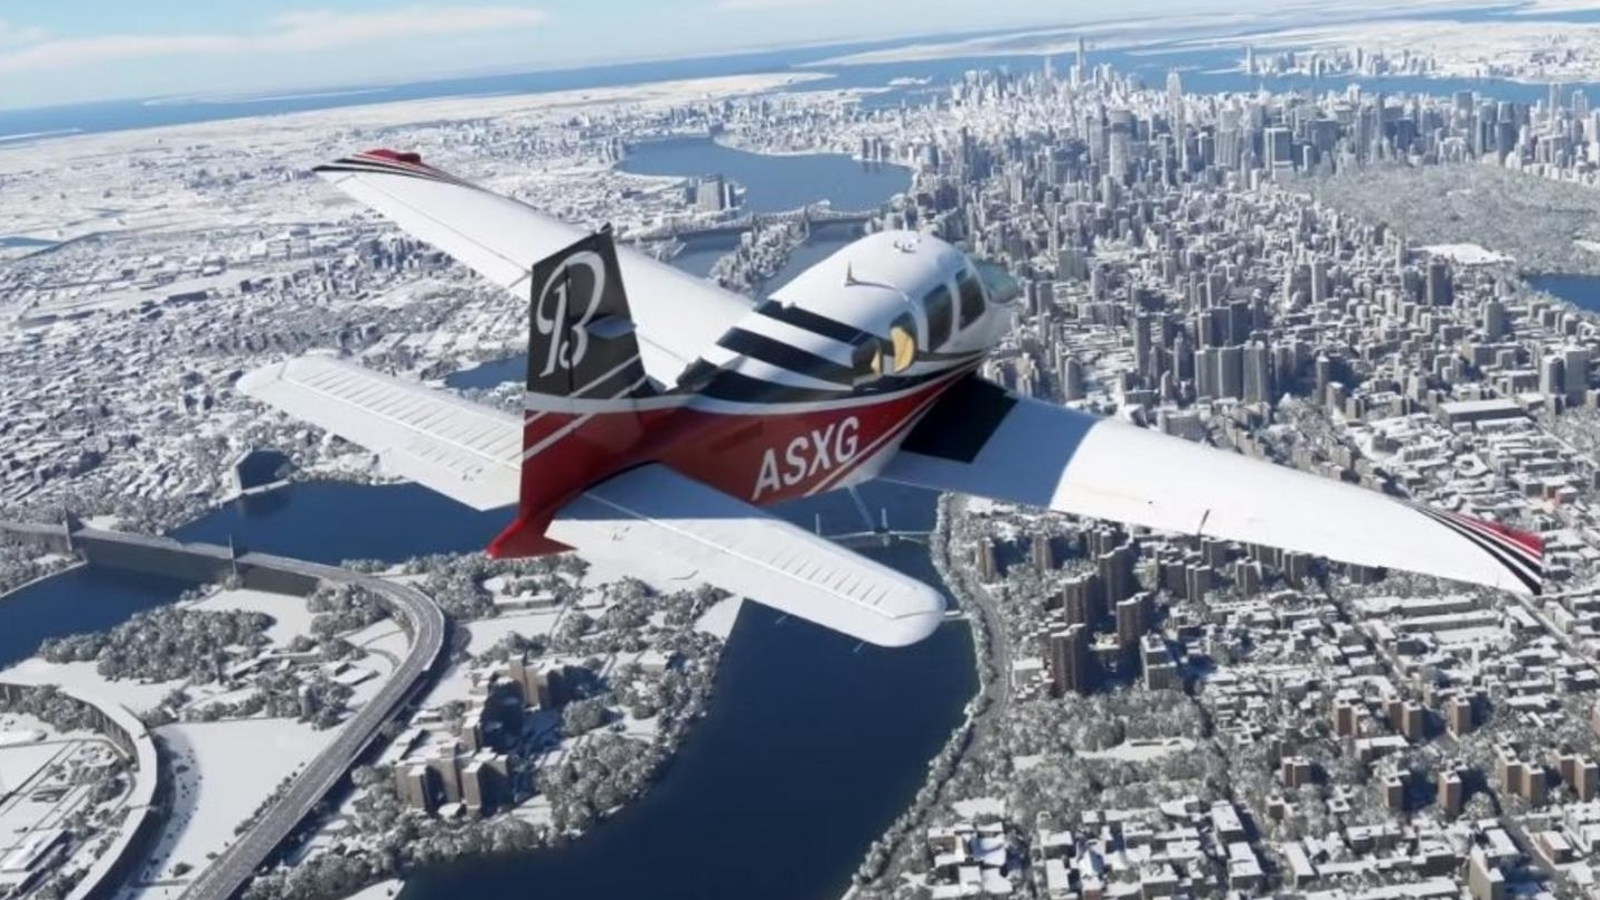 Microsoft Flight Simulator is about to get a huge performance boost